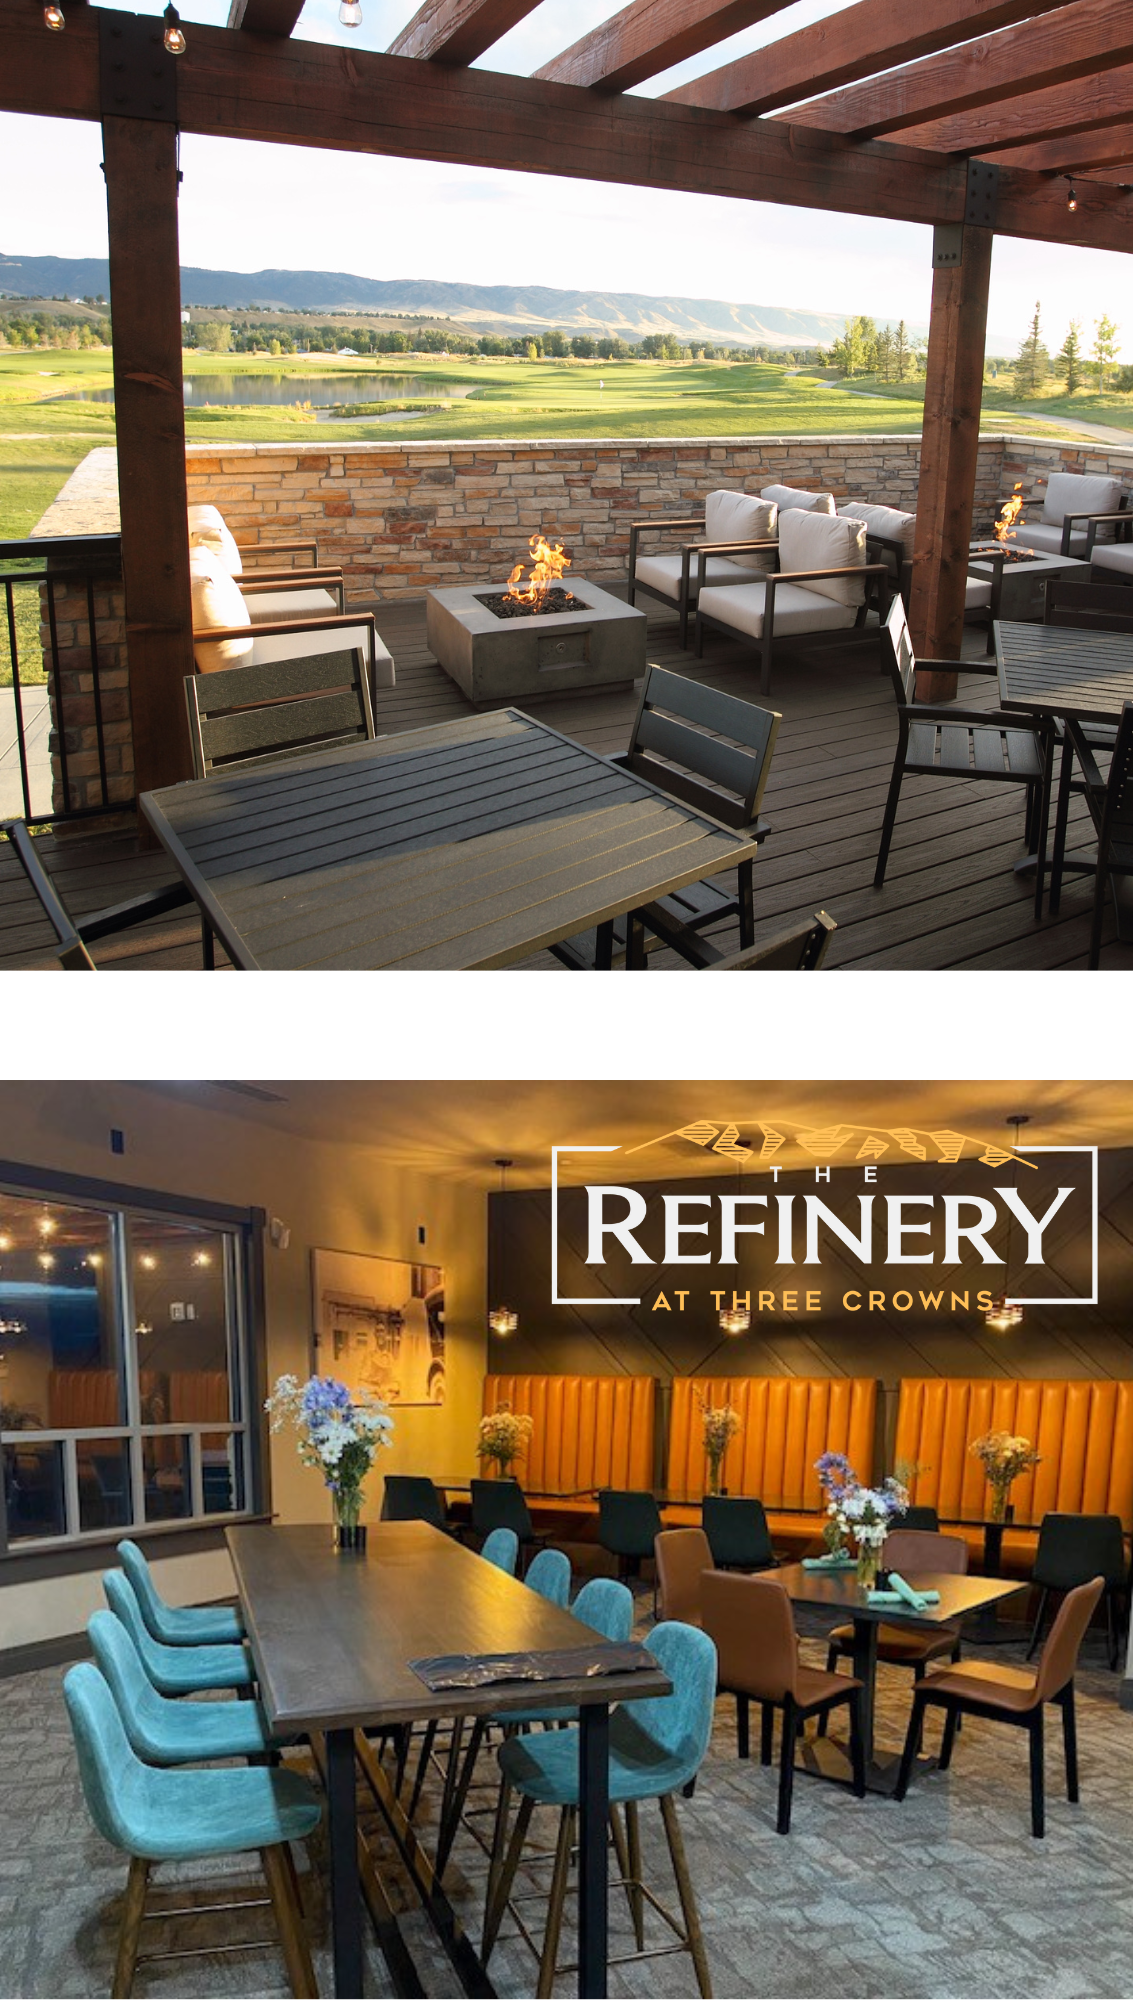 Introducing The Refinery